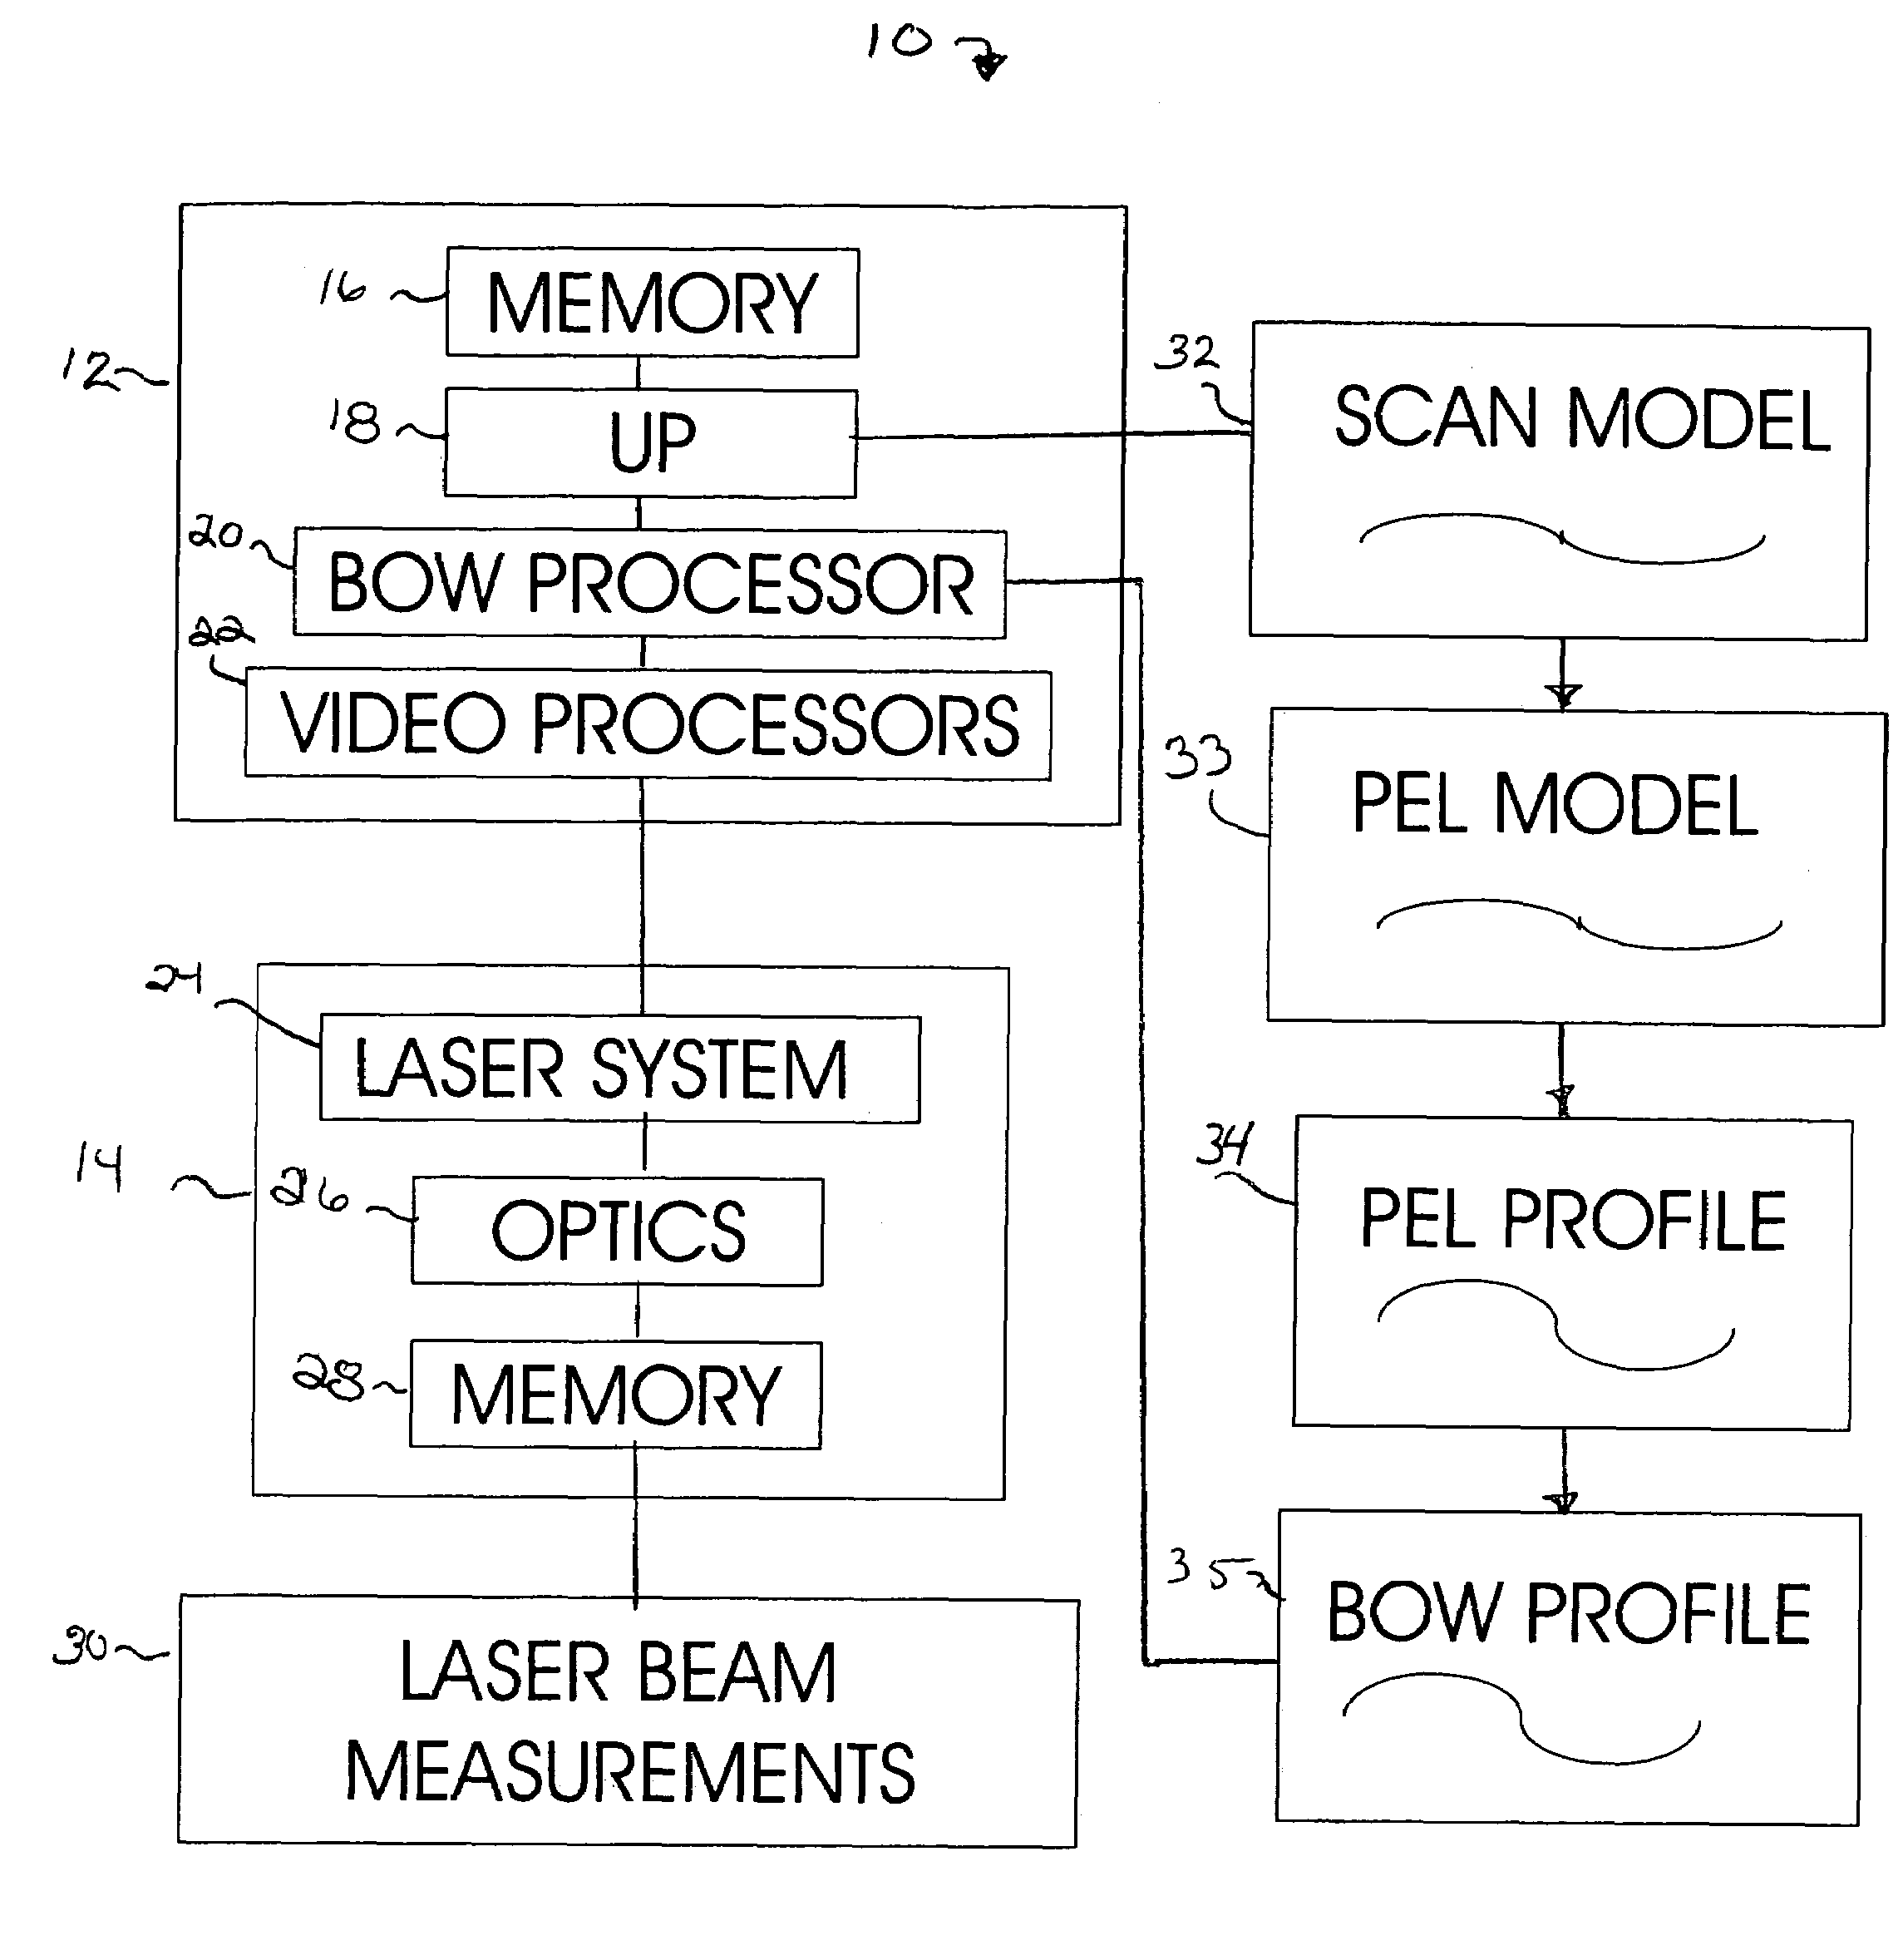 Algorithms and methods for determining laser beam process direction position errors from data stored on a printhead